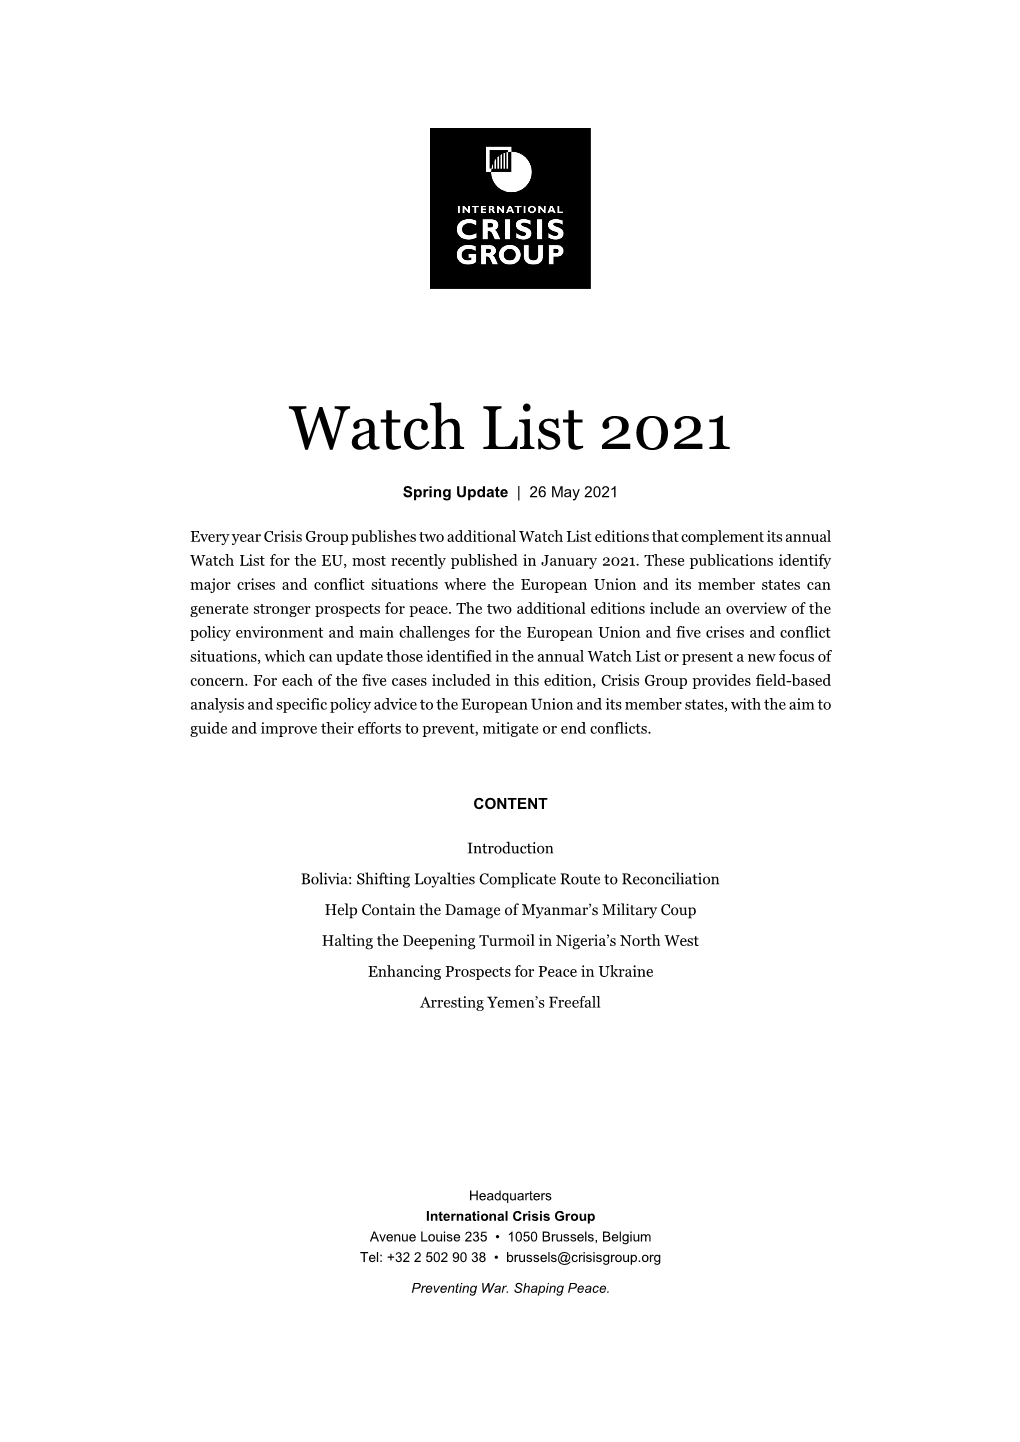 Watch List 2021 Spring Update International Crisis Group, May 2021 Page 3